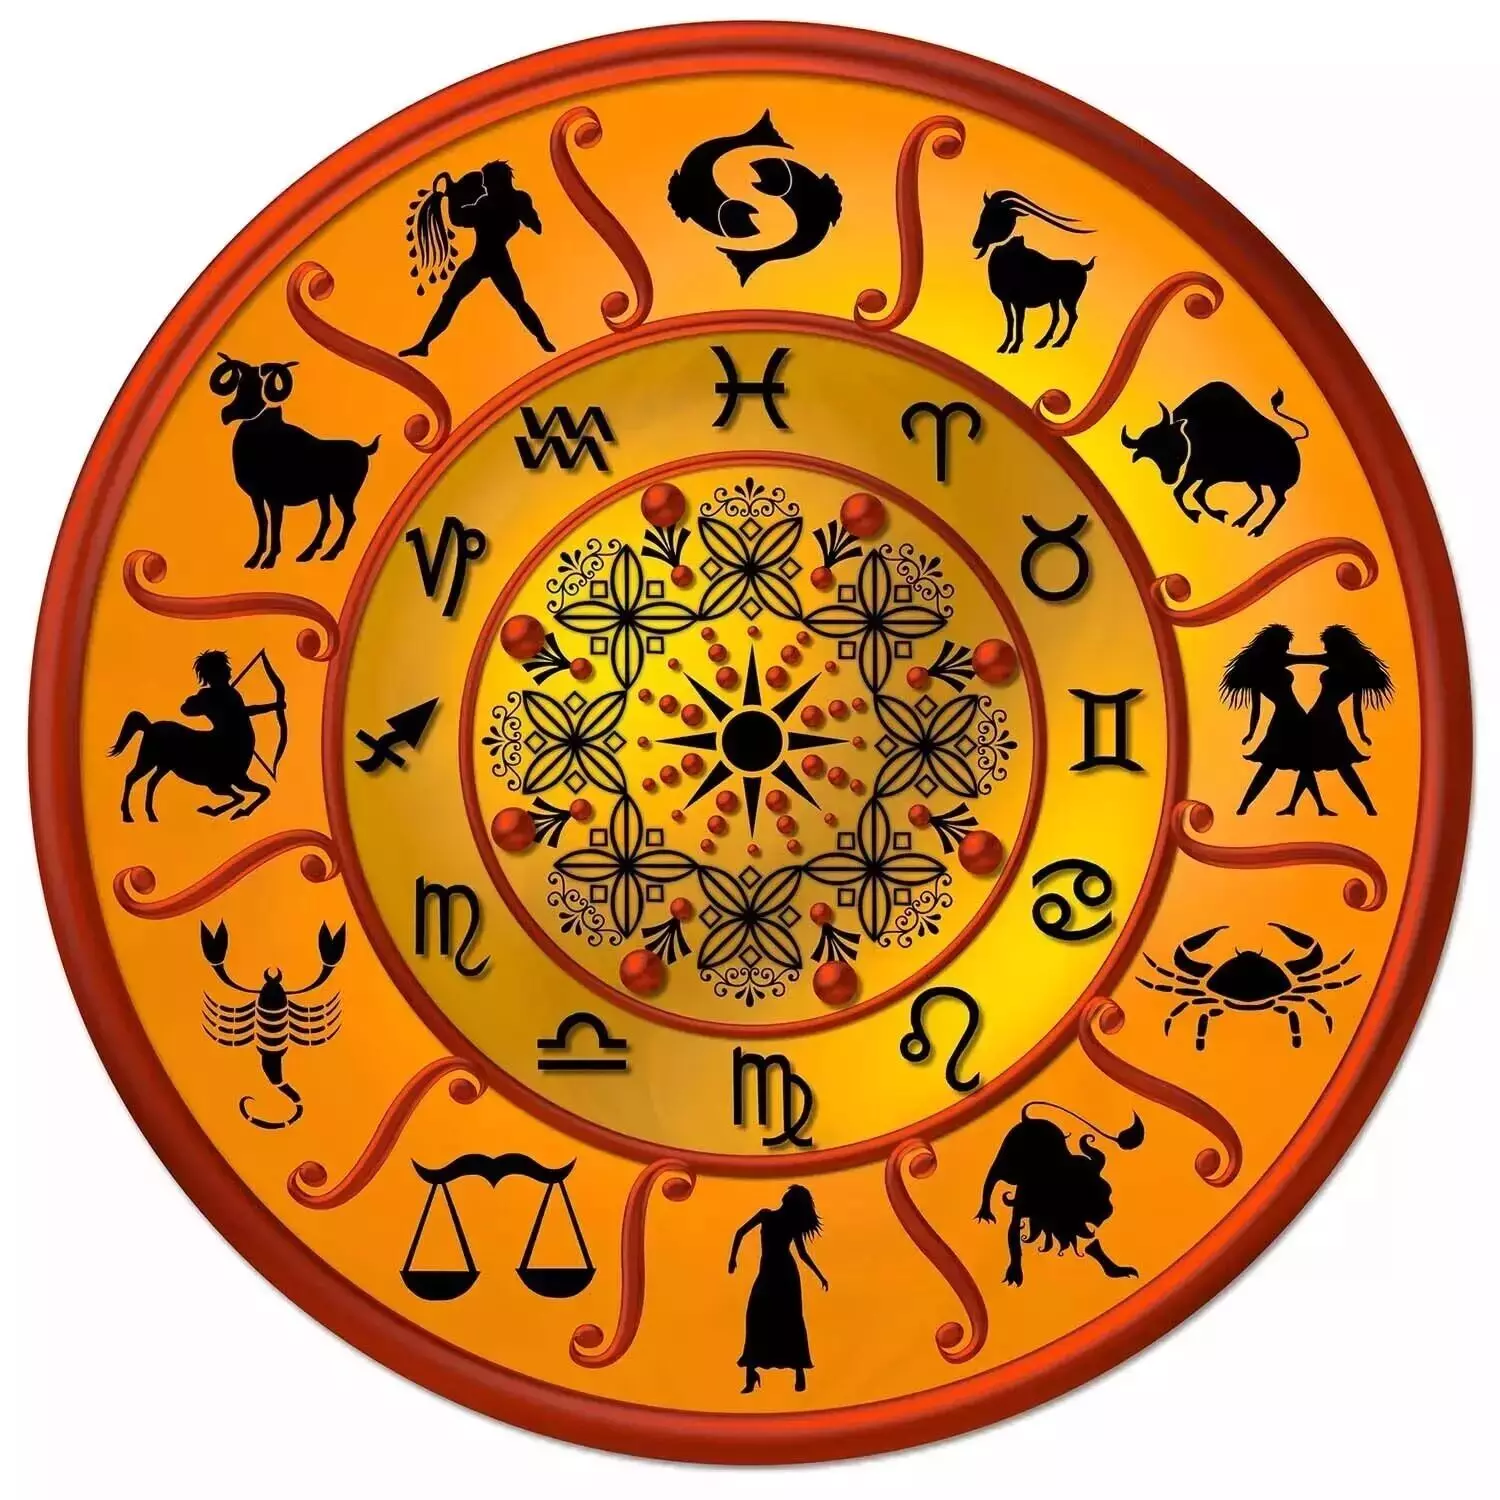 15 June  – Know your todays horoscope